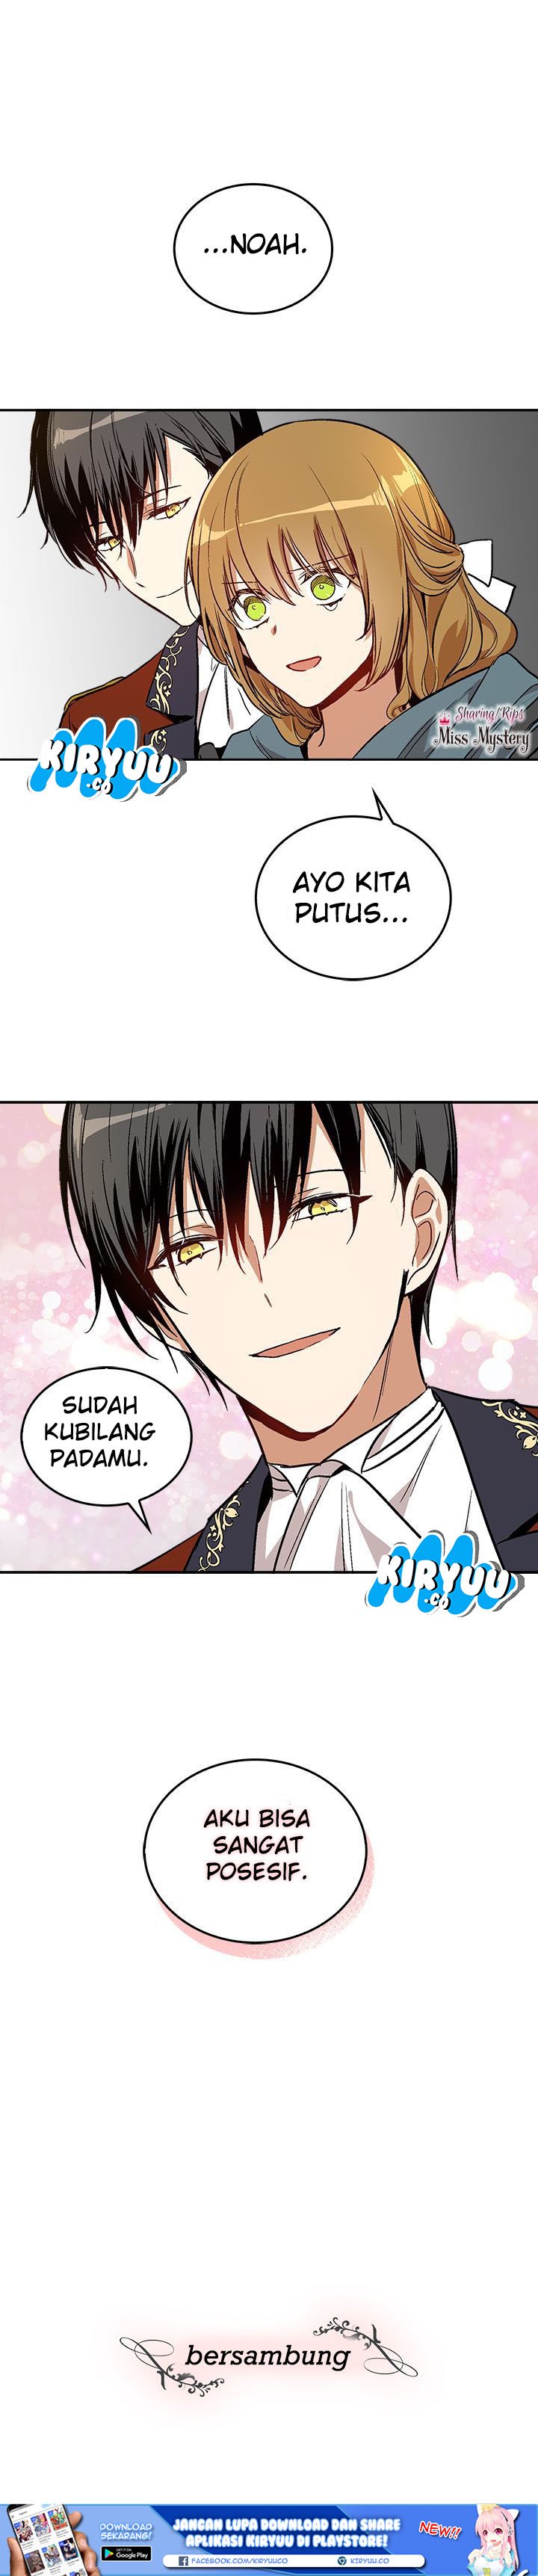 The Reason Why Raeliana Ended up at the Duke’s Mansion Chapter 44